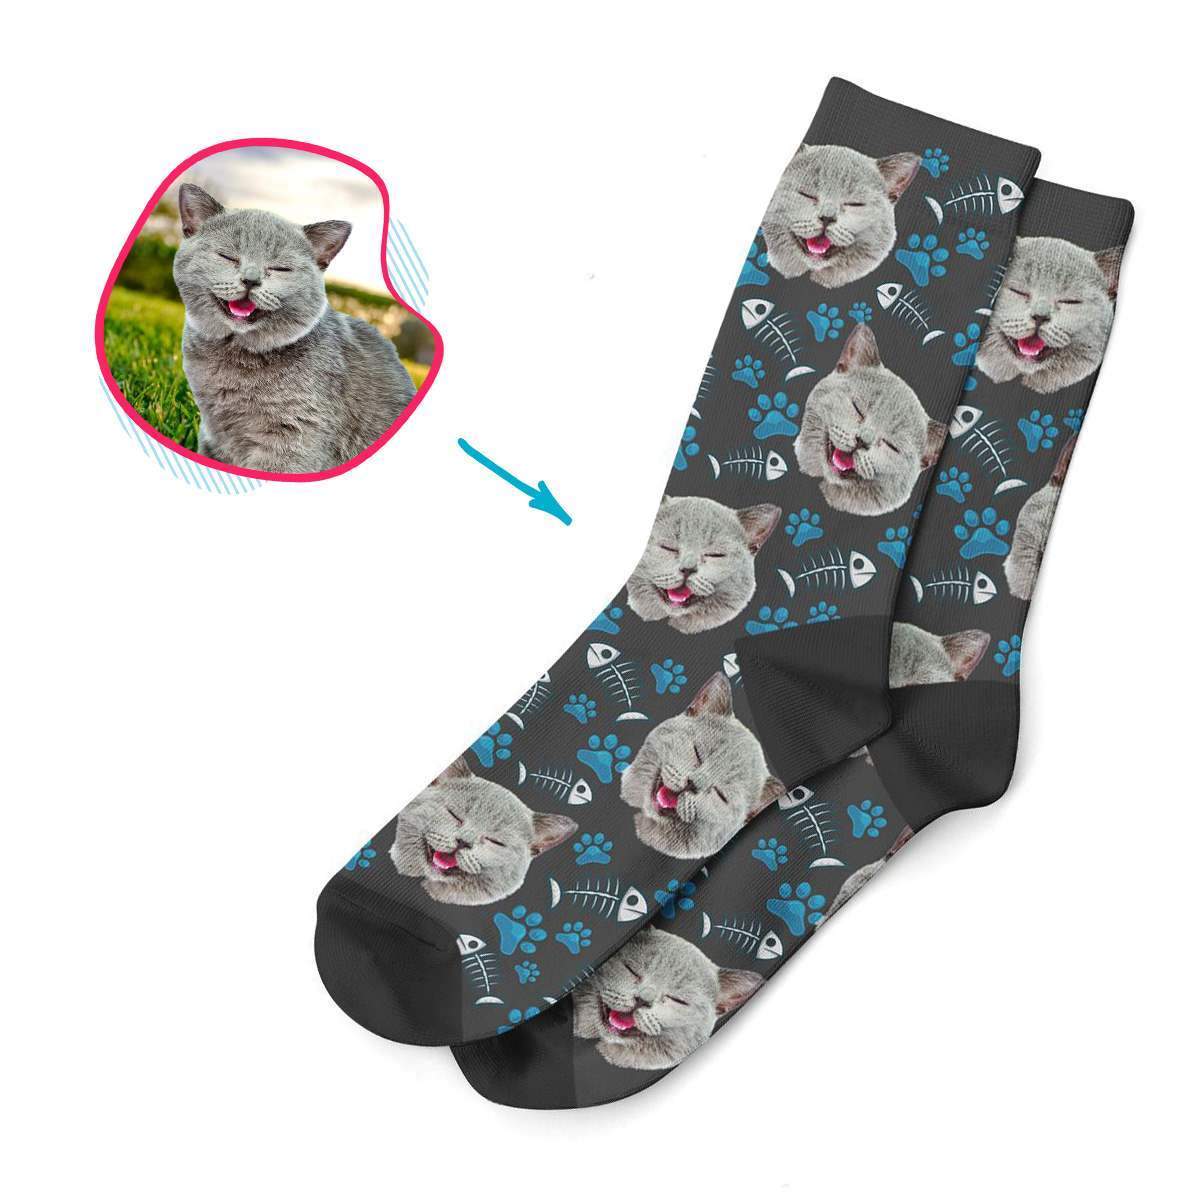 dark Cat socks personalized with photo of face printed on them